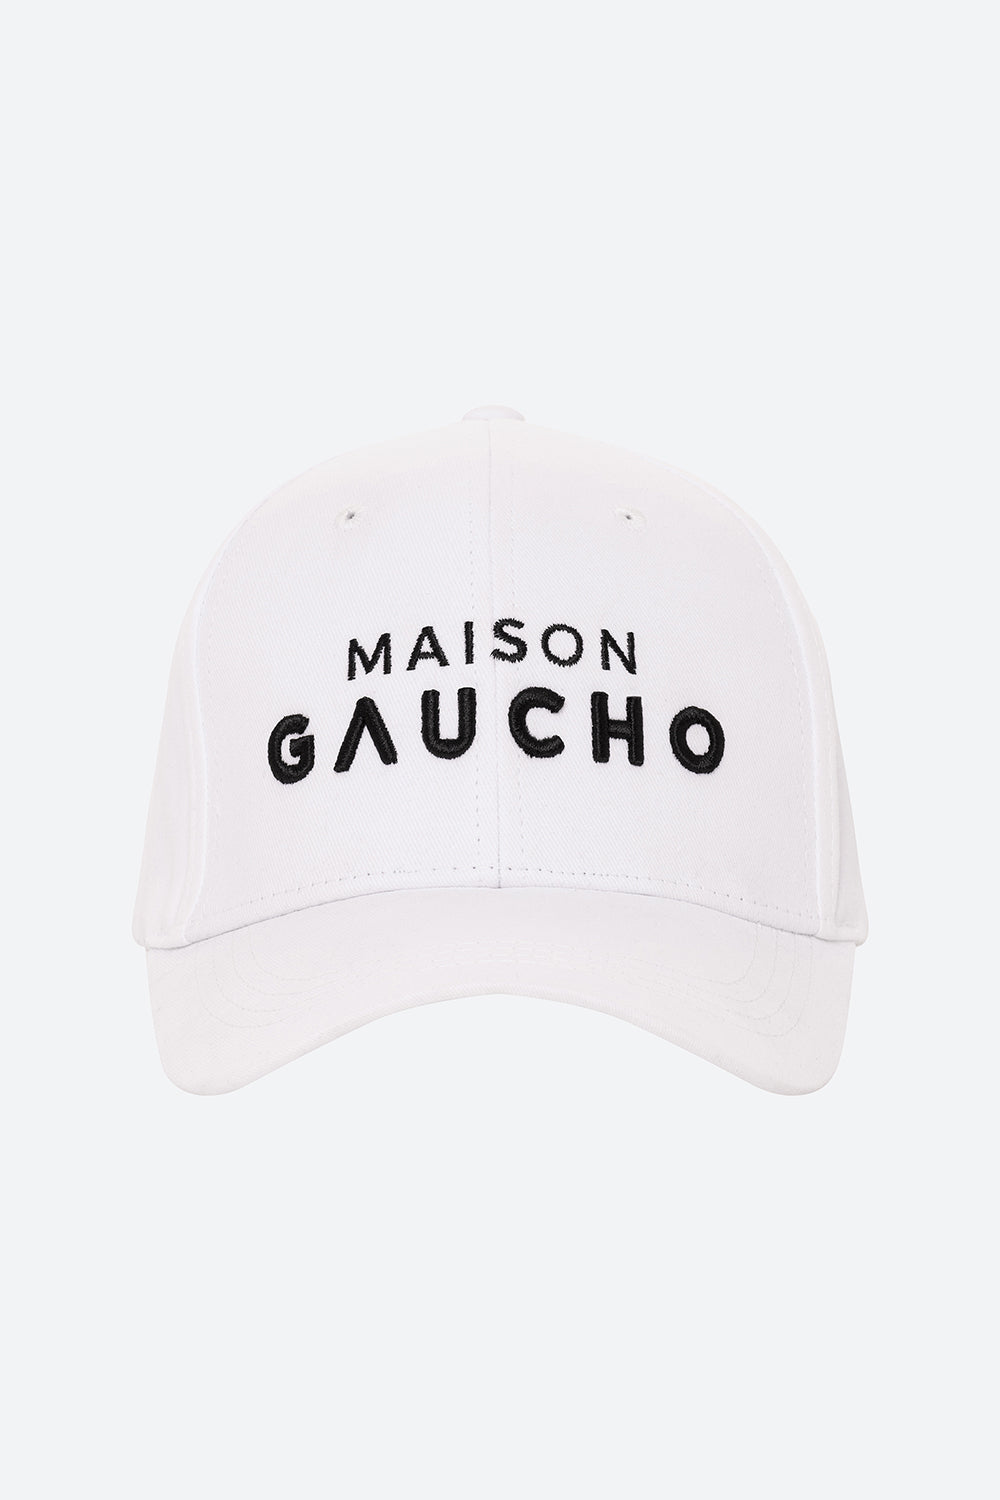 Men's Maison Gaucho Cap in White with Black Embroidery